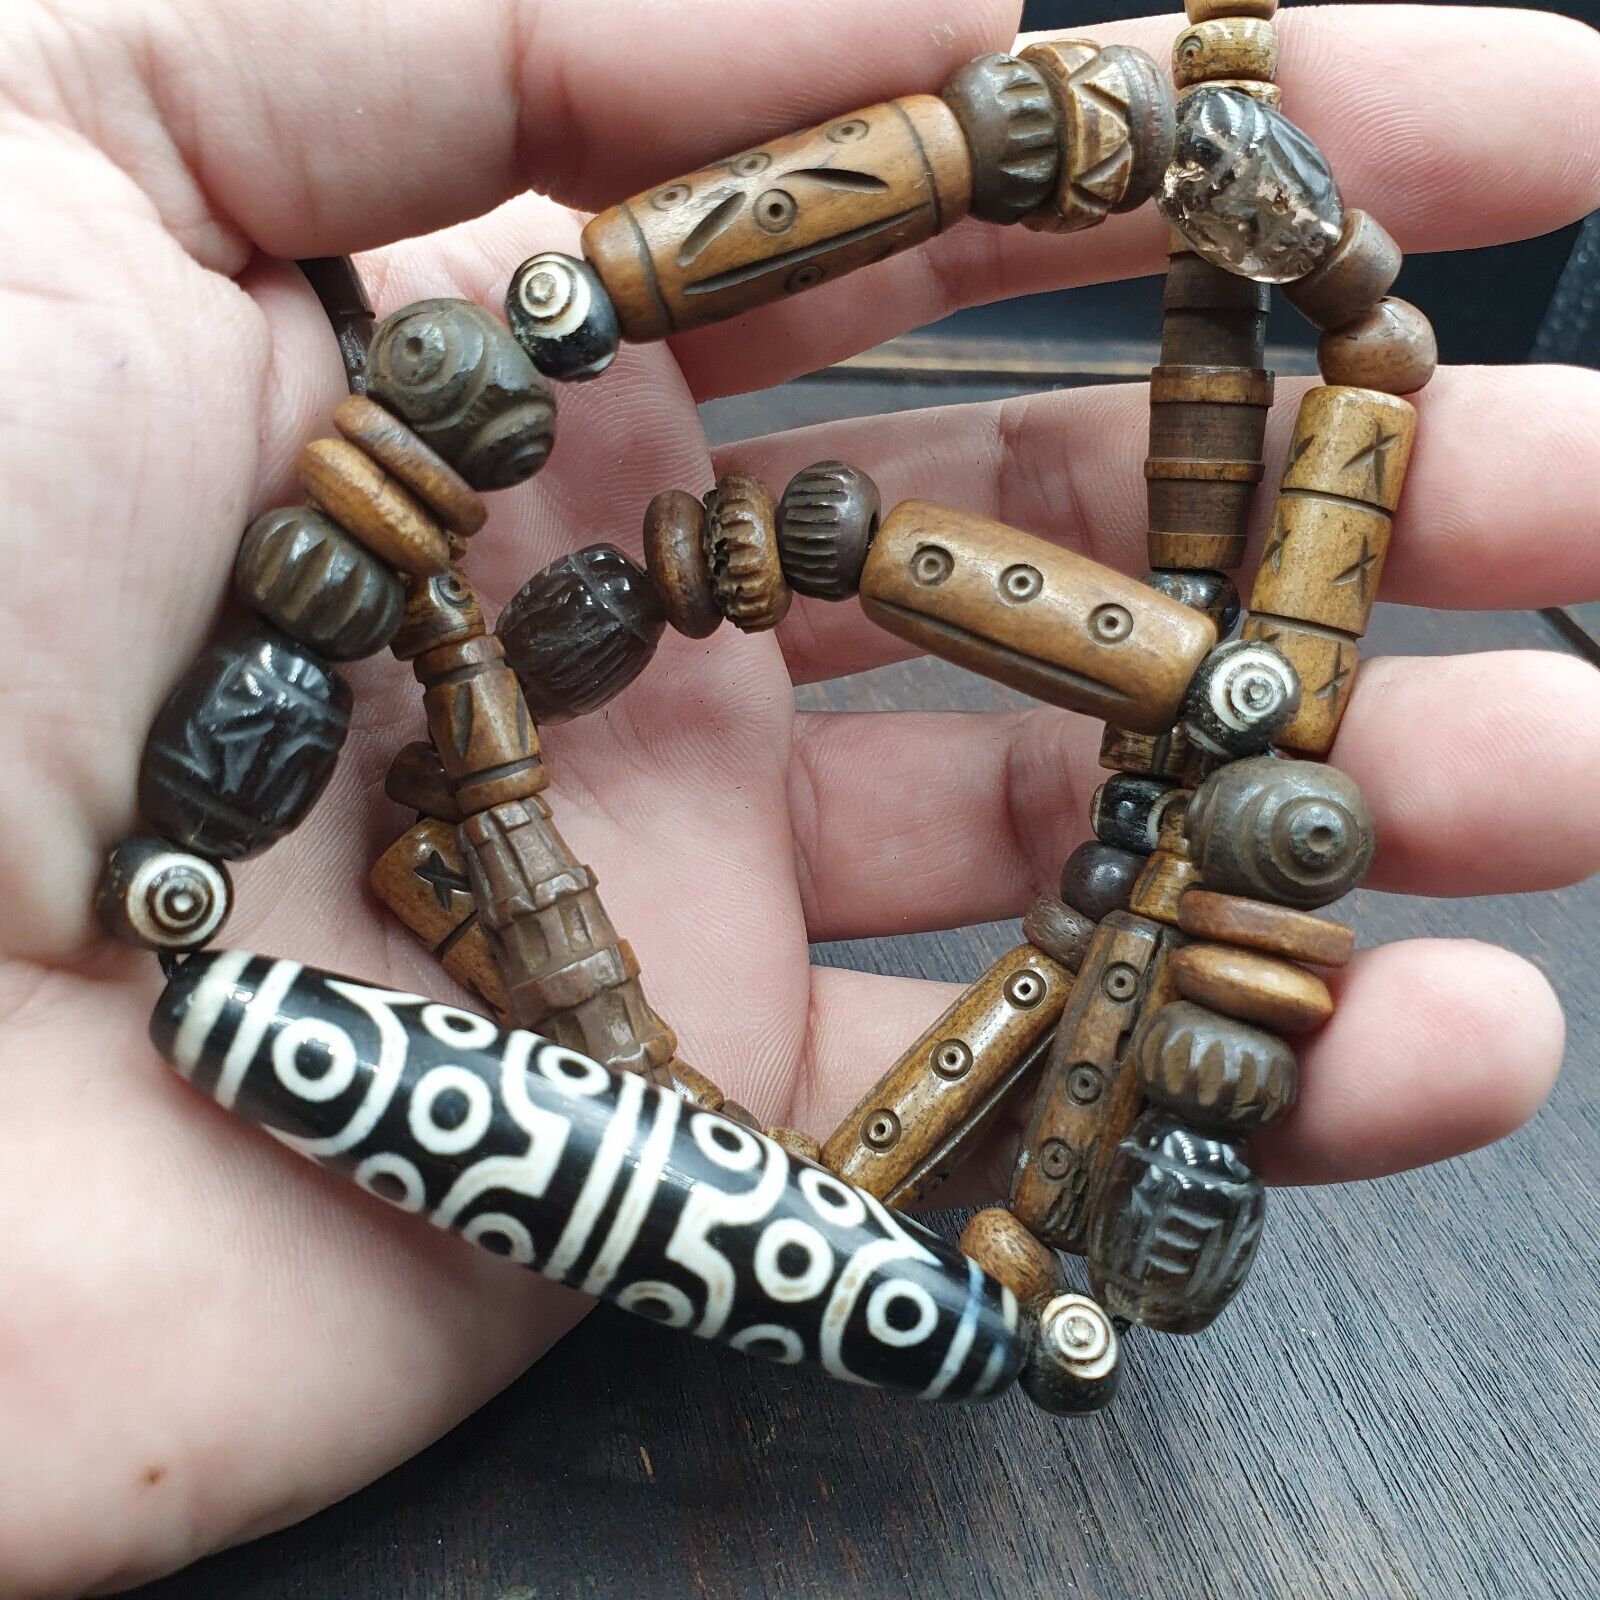 24 eyes Tibetan Himalayan bead old amulet Agate with carving Yak Bone Necklace